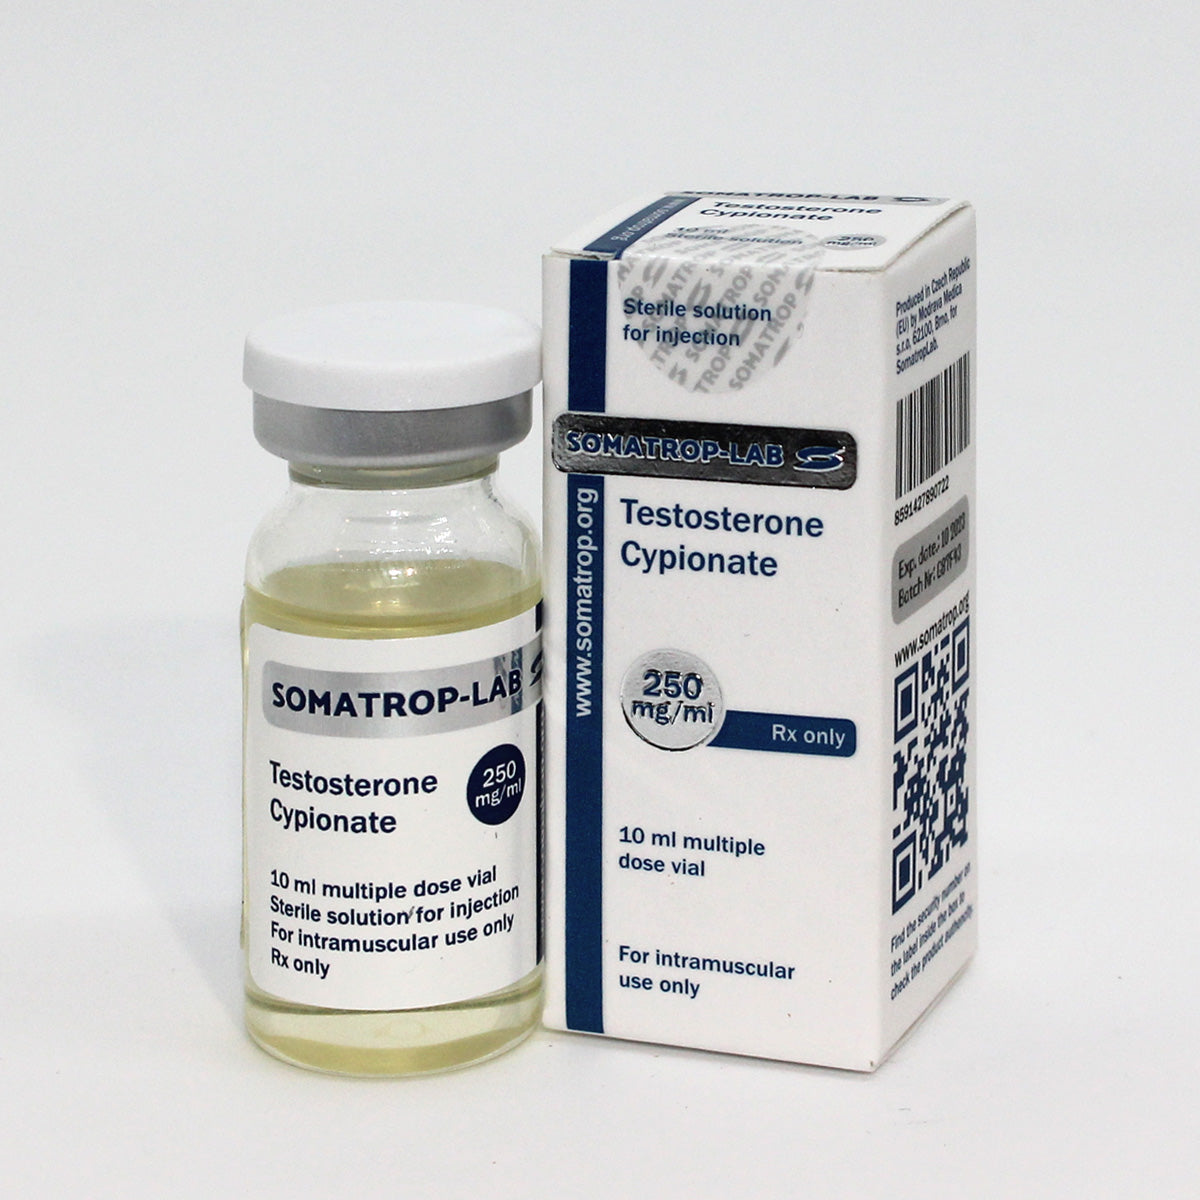 Somatrop-Lab Testosterone Cypionate: 10ml vial, 250mg/ml. Front view of the packaging.